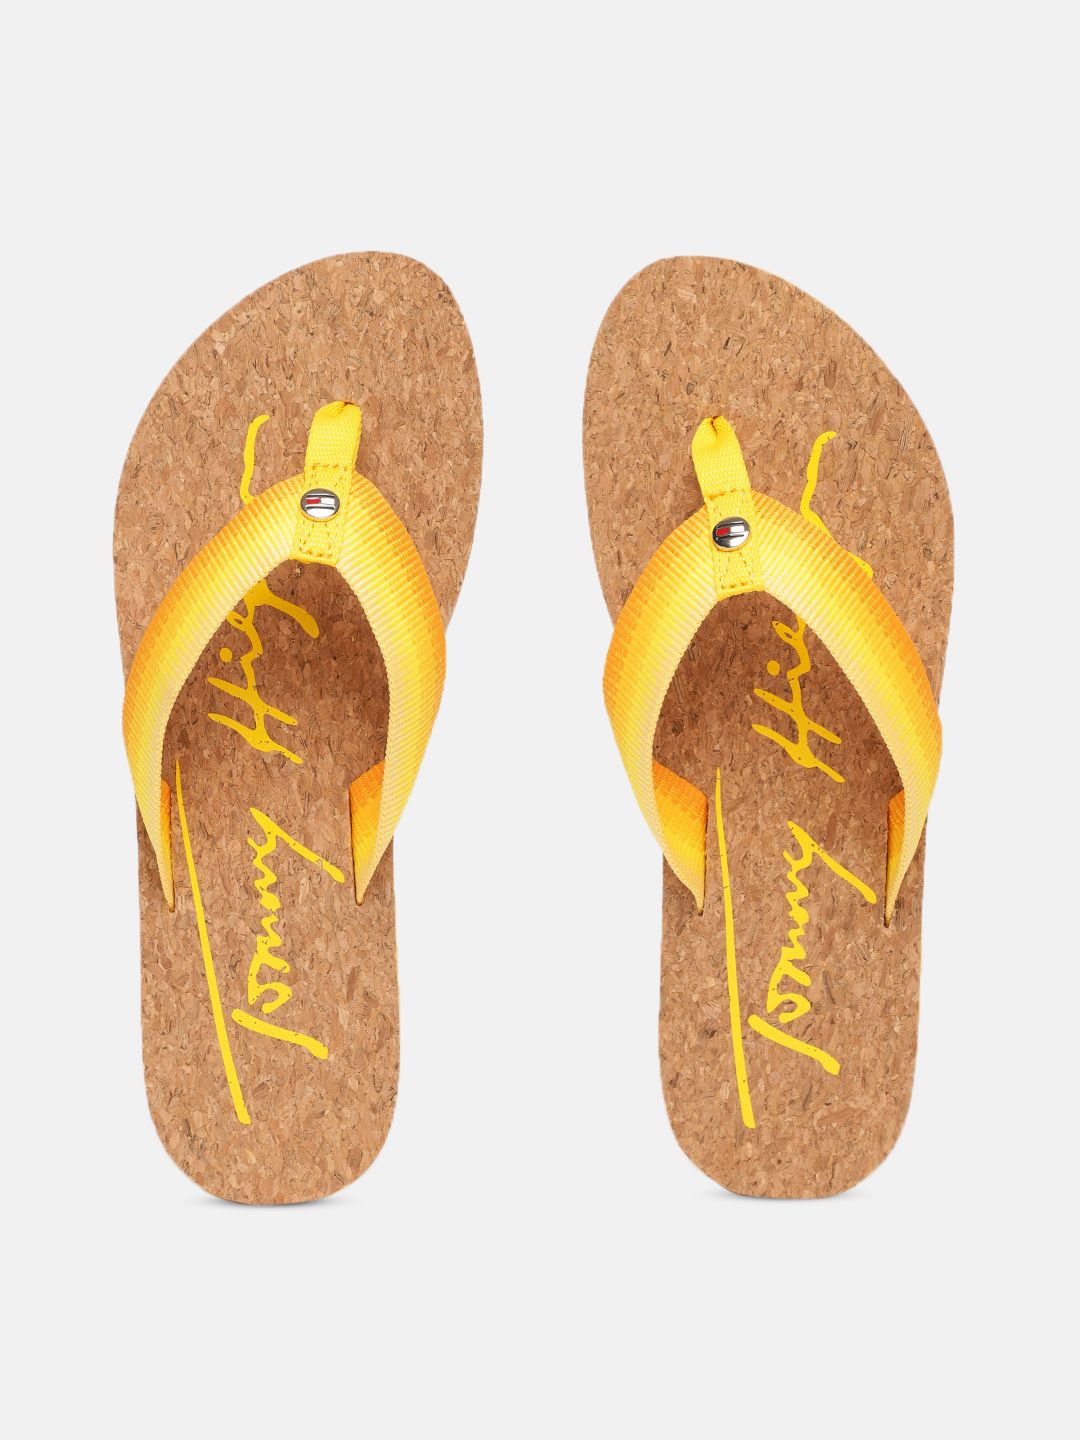 Tommy Hilfiger Women Yellow Striped Thong Flip-Flops Price in India